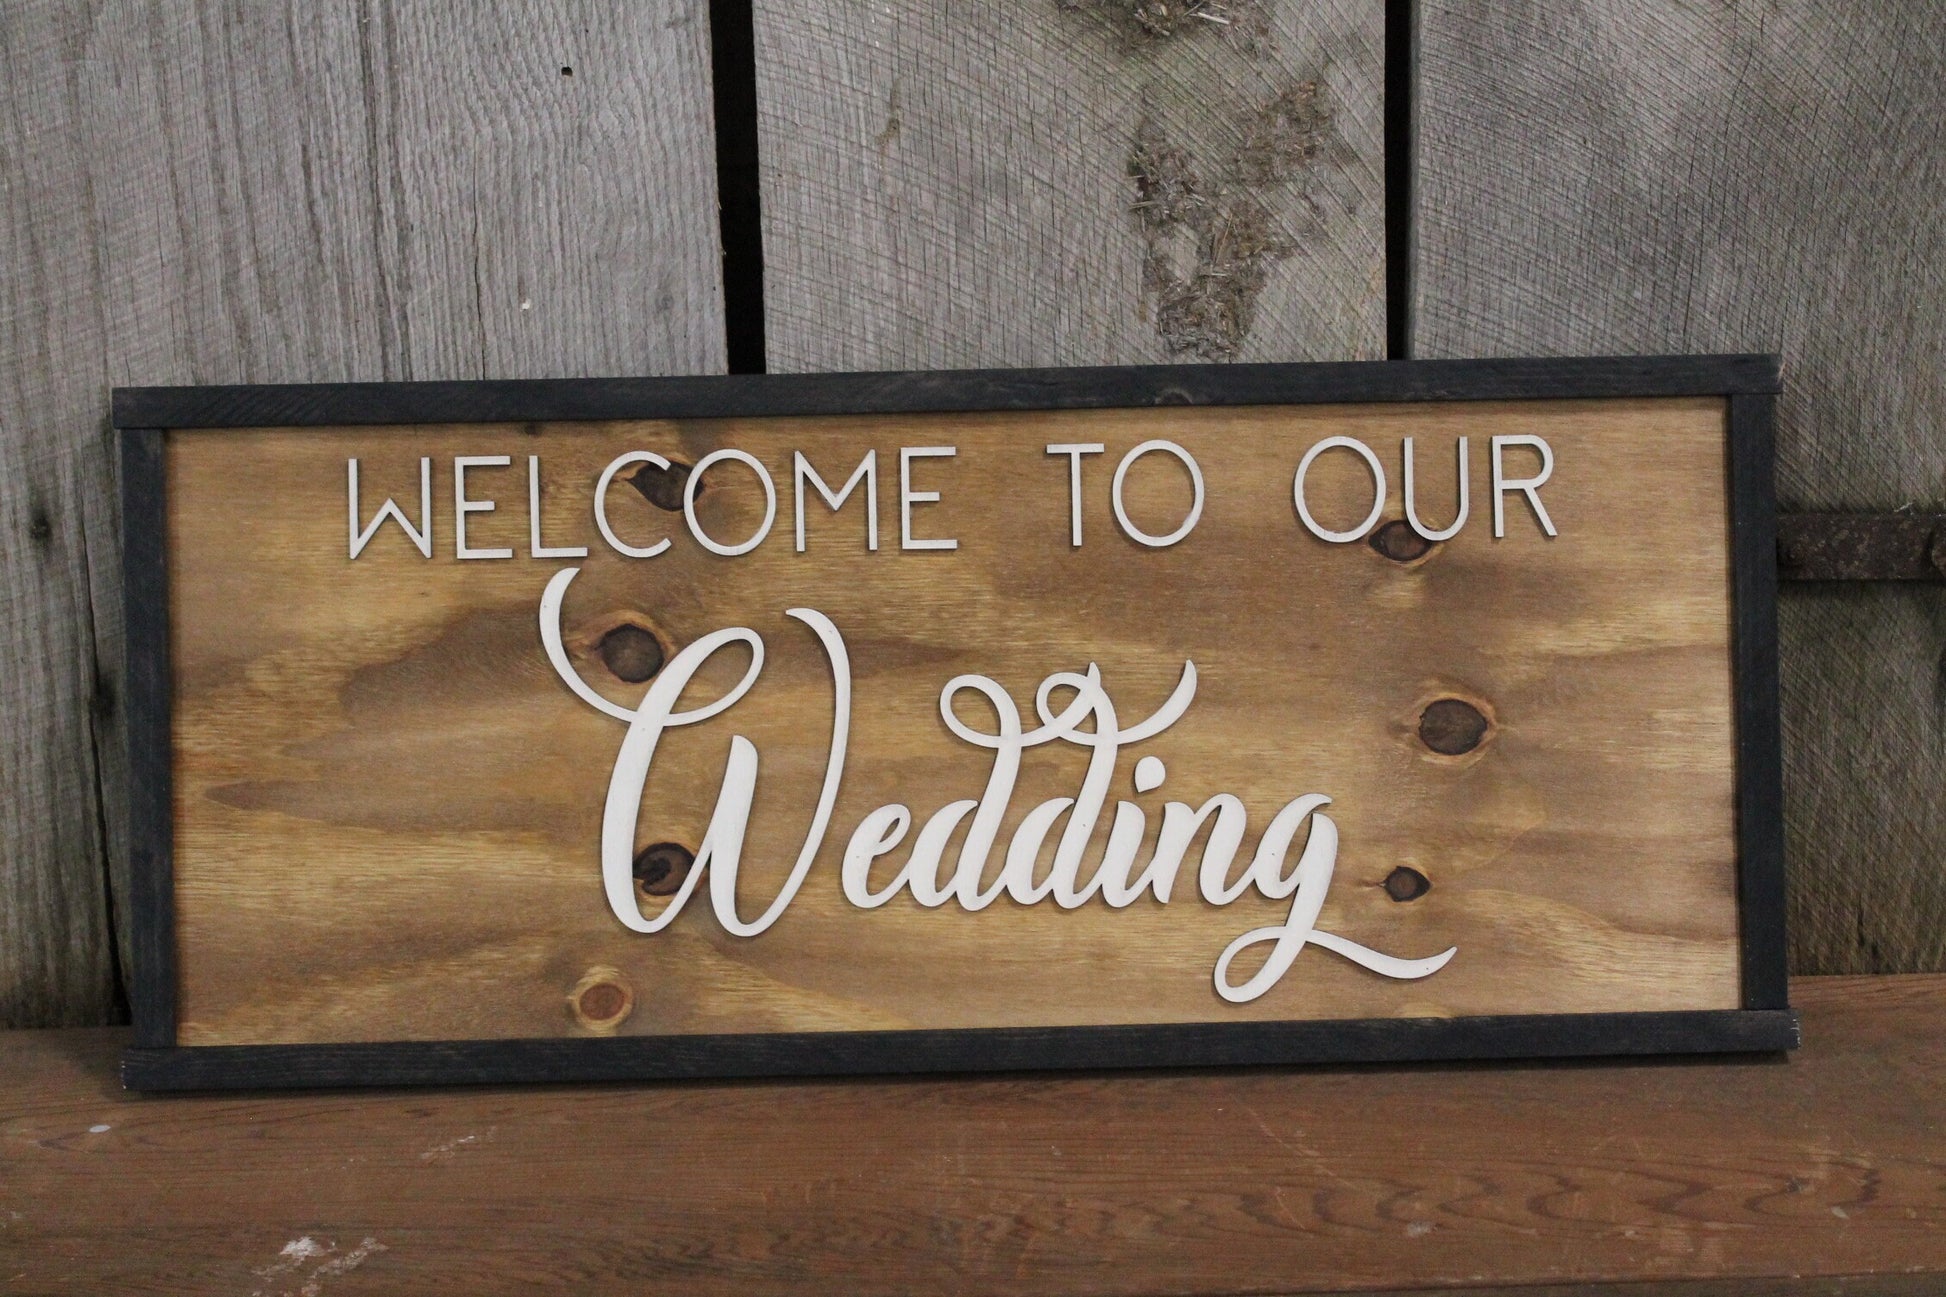 Rustic Welcome to Our Wedding Sign Raised Text Large Framed Primitive Barn Wood Country Signage 3D Reception Decoration Table